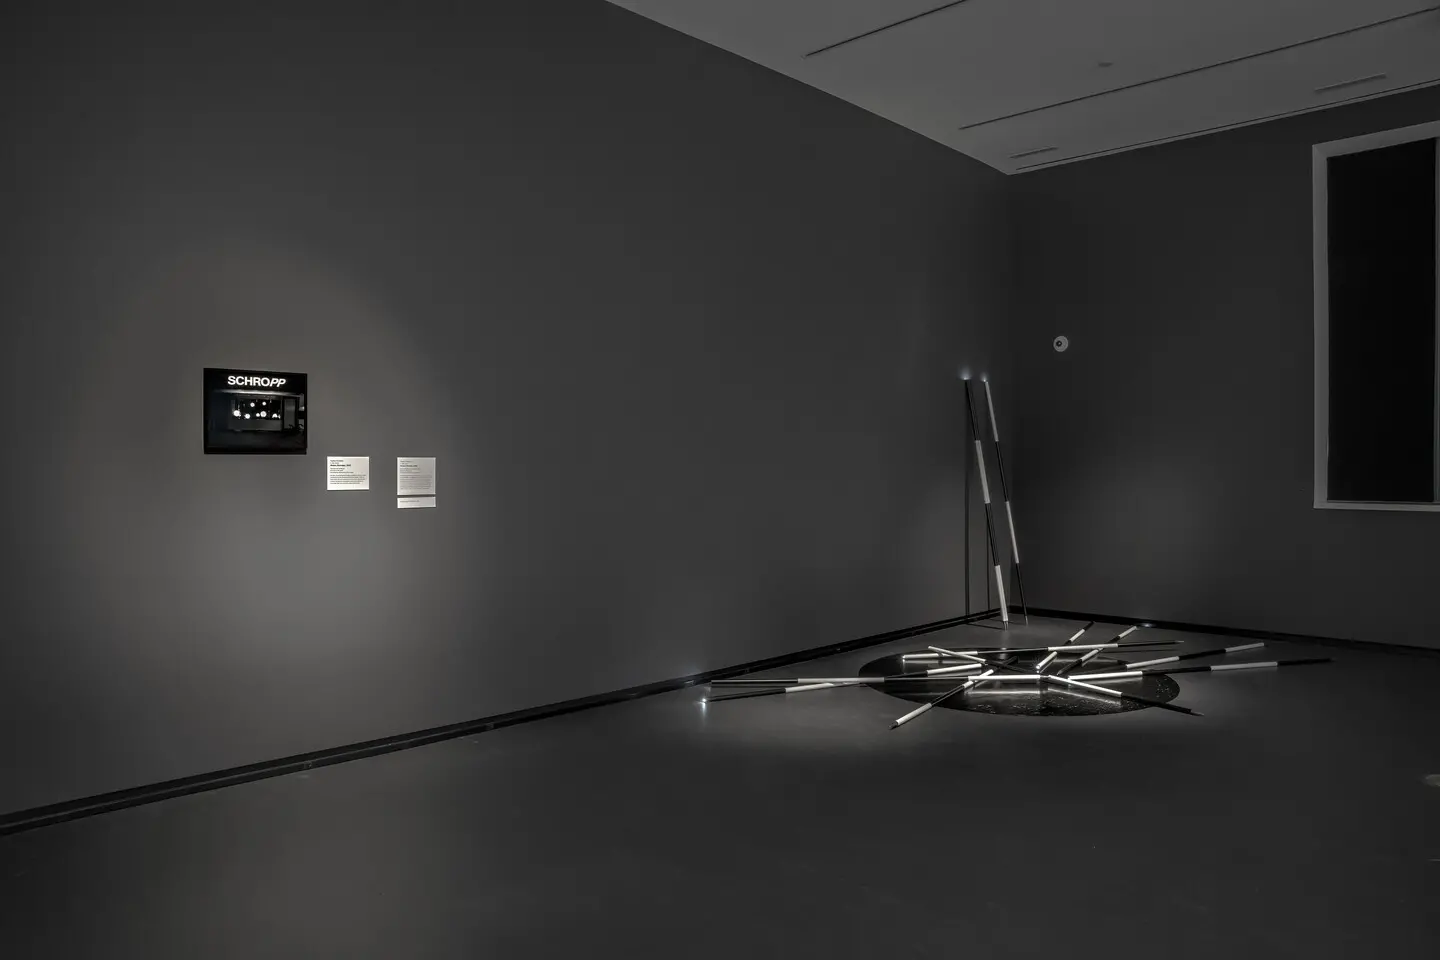 A dark room with small black and white photo on wall at left and artwork of black and white rods at right.